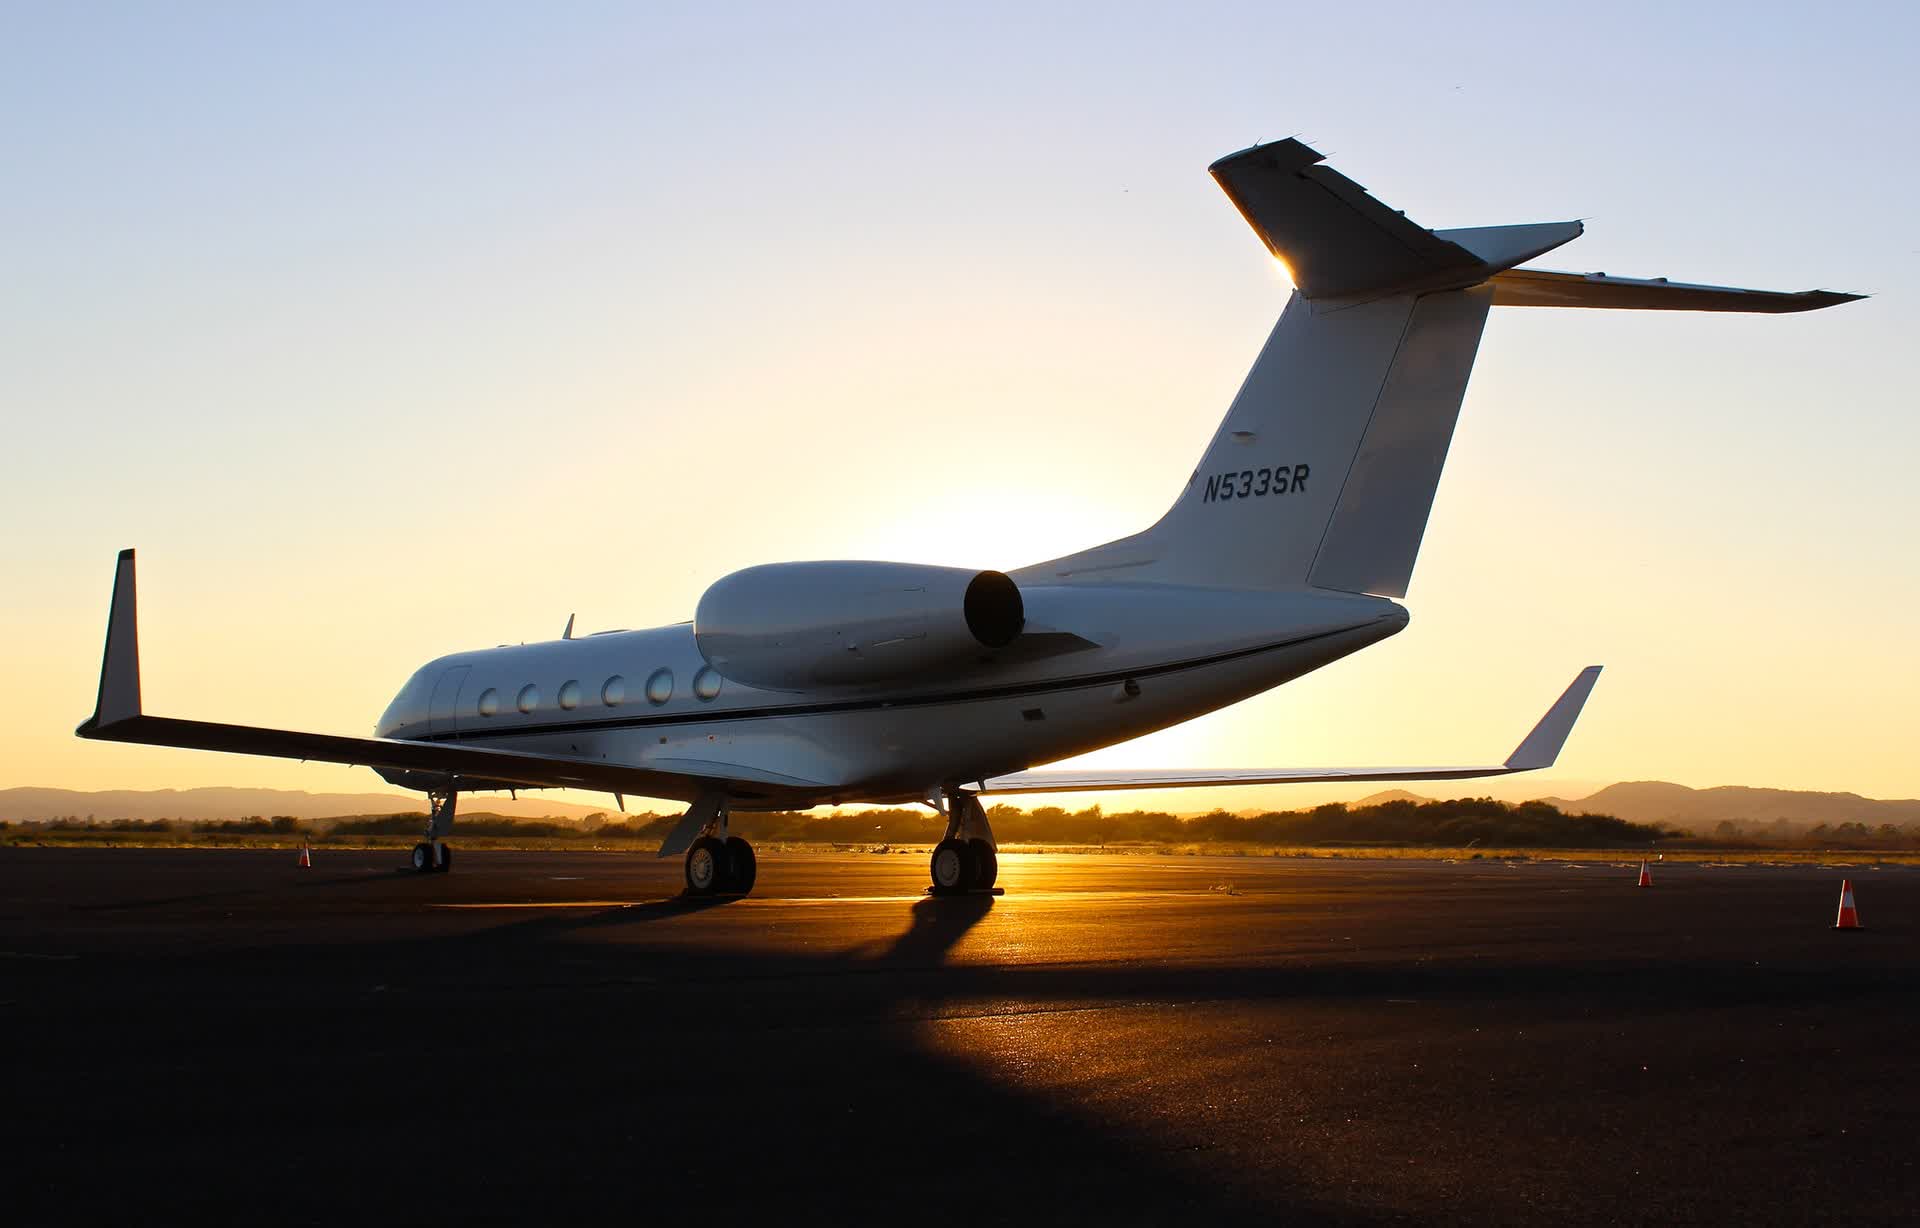 World's second-richest person sells private jet to stop Twitter users tracking it